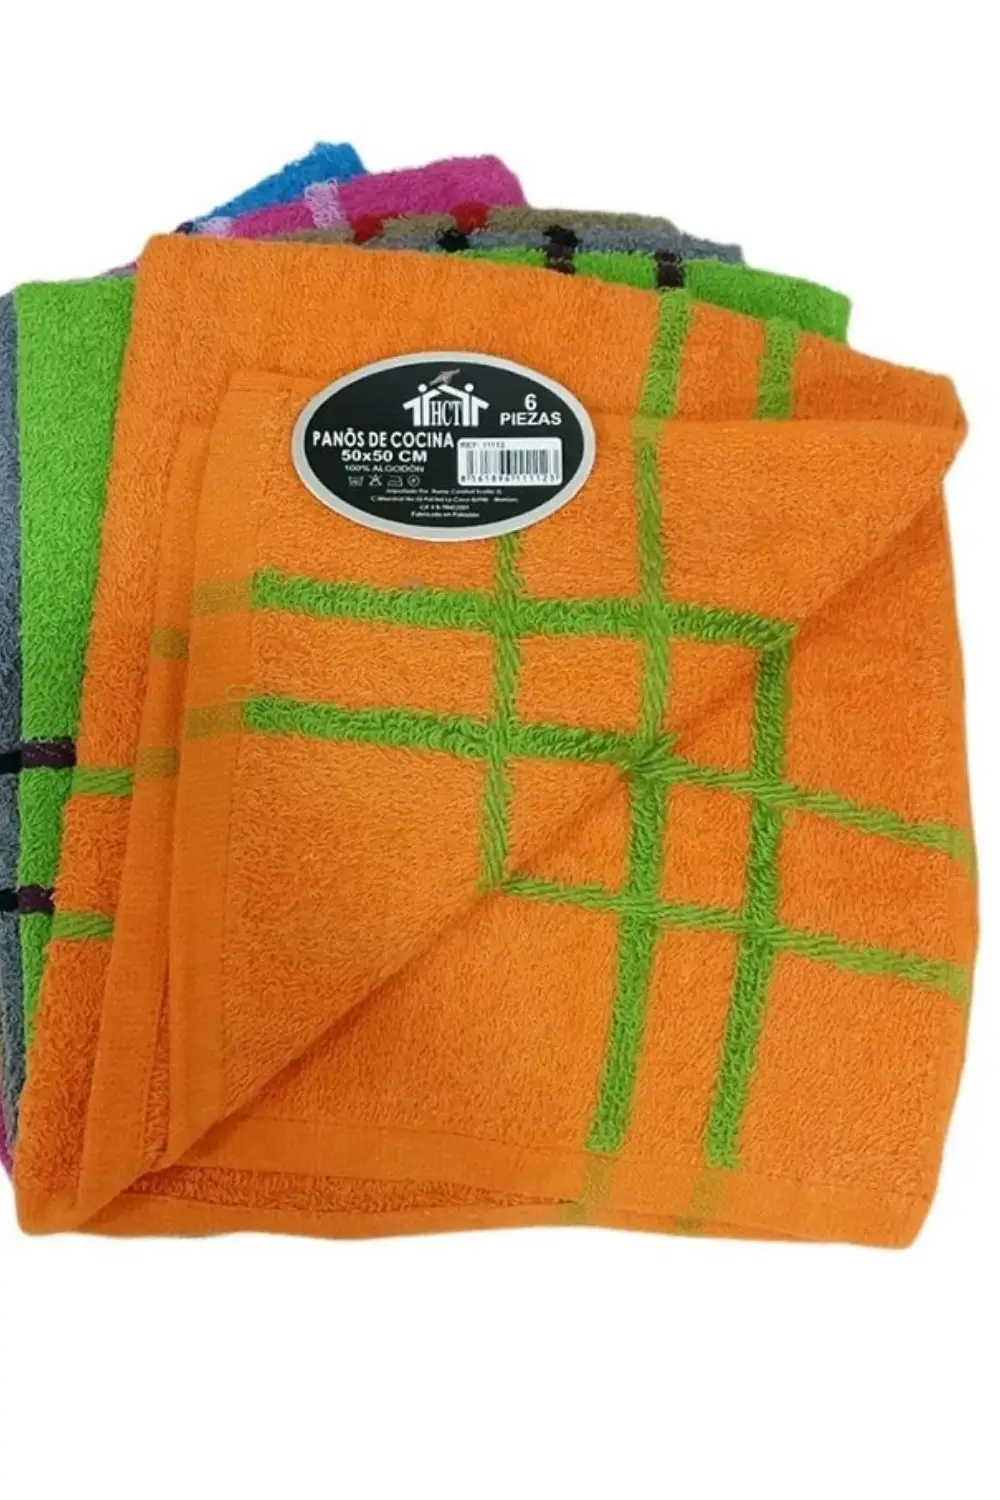 PACK OF 6 STRIPED TERRY CLOTHS